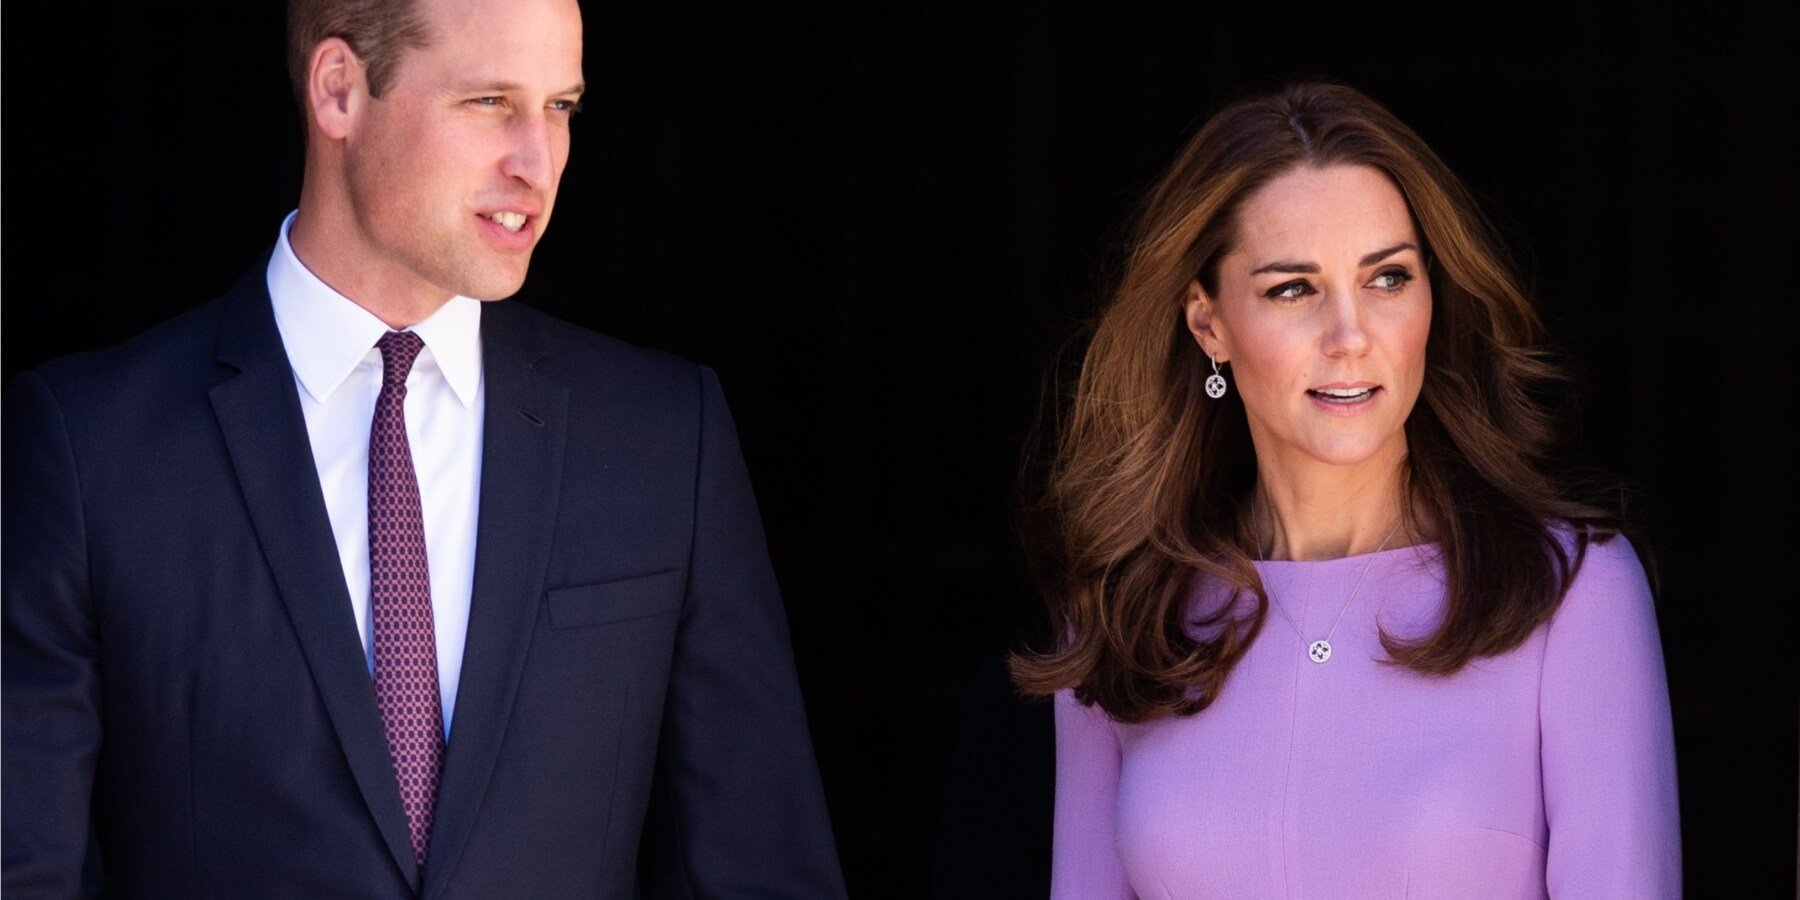 Prince William and Kate Middleton are photographed in October 2018 in London.